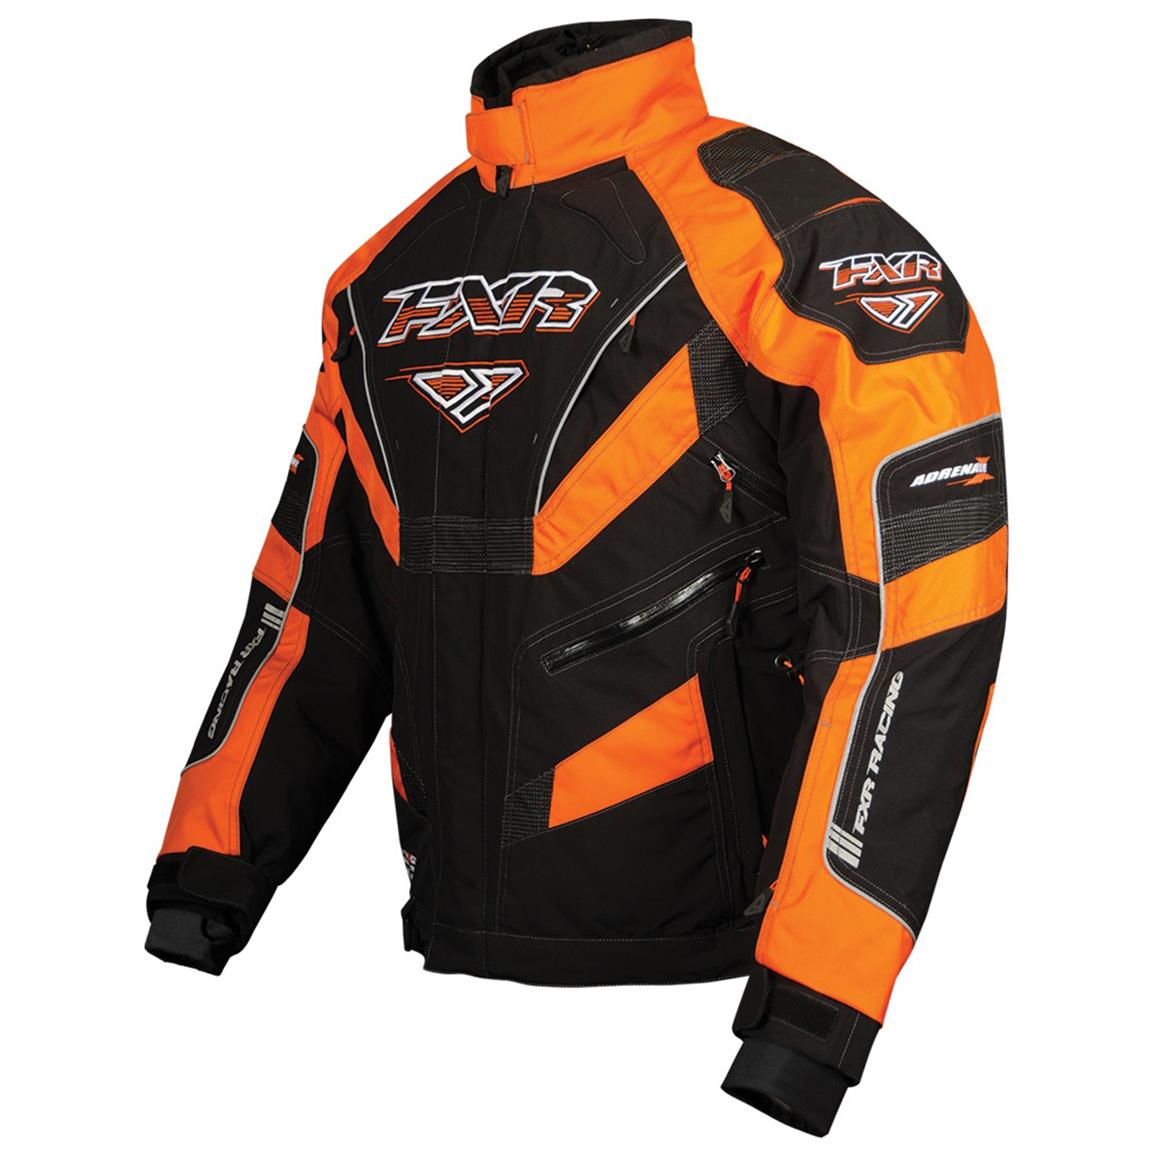 FXR® Adrenaline X Jacket - 588518, Snowmobile Clothing at Sportsman's Guide